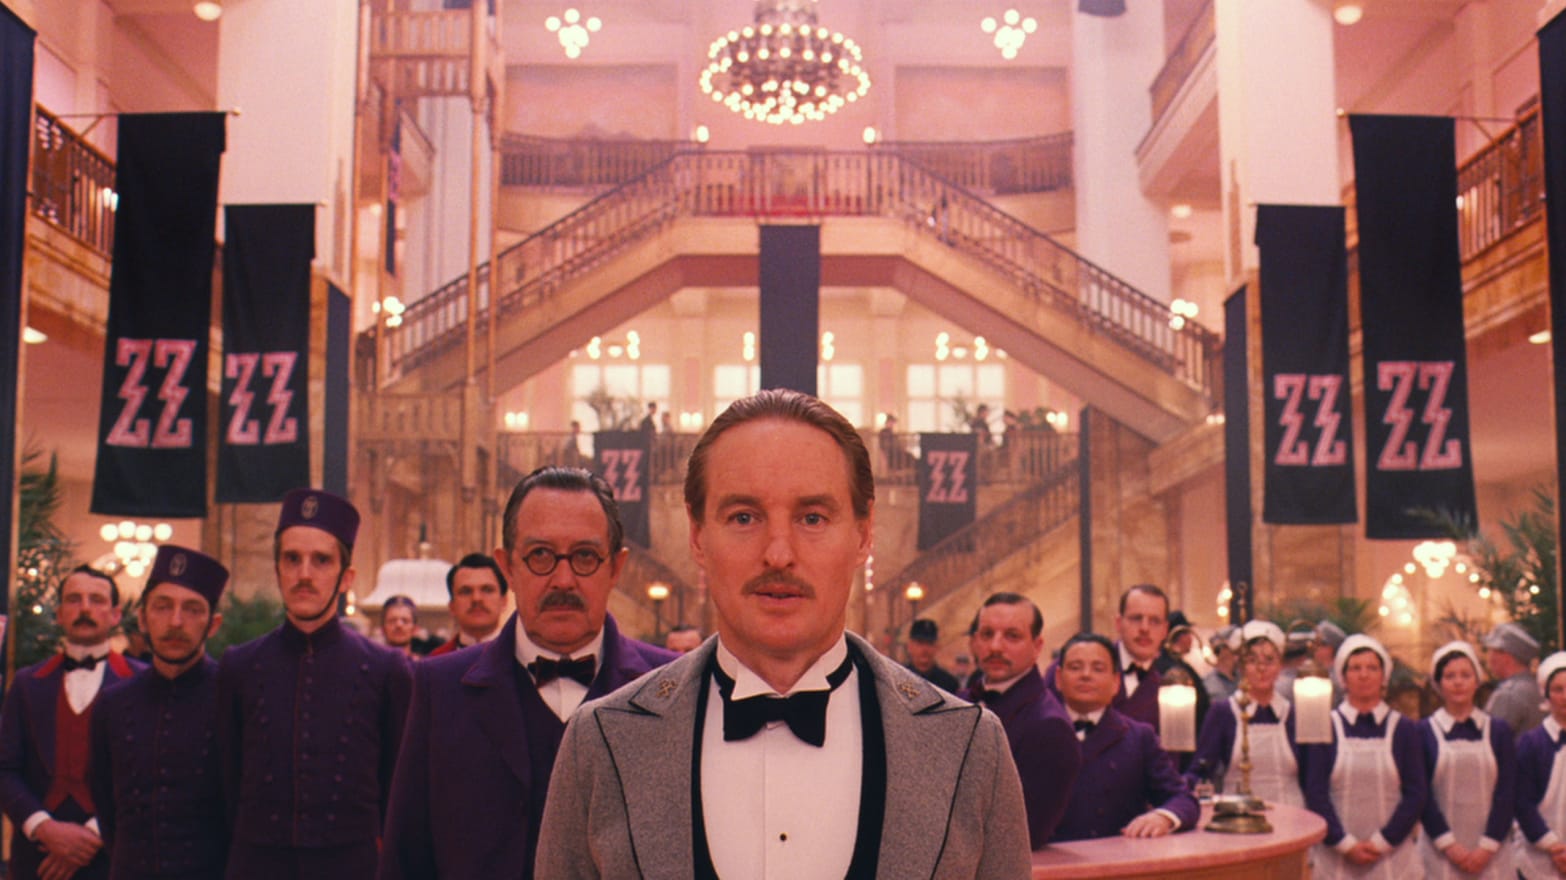 Shot of the actors of the Grand Hotel Budapest movie